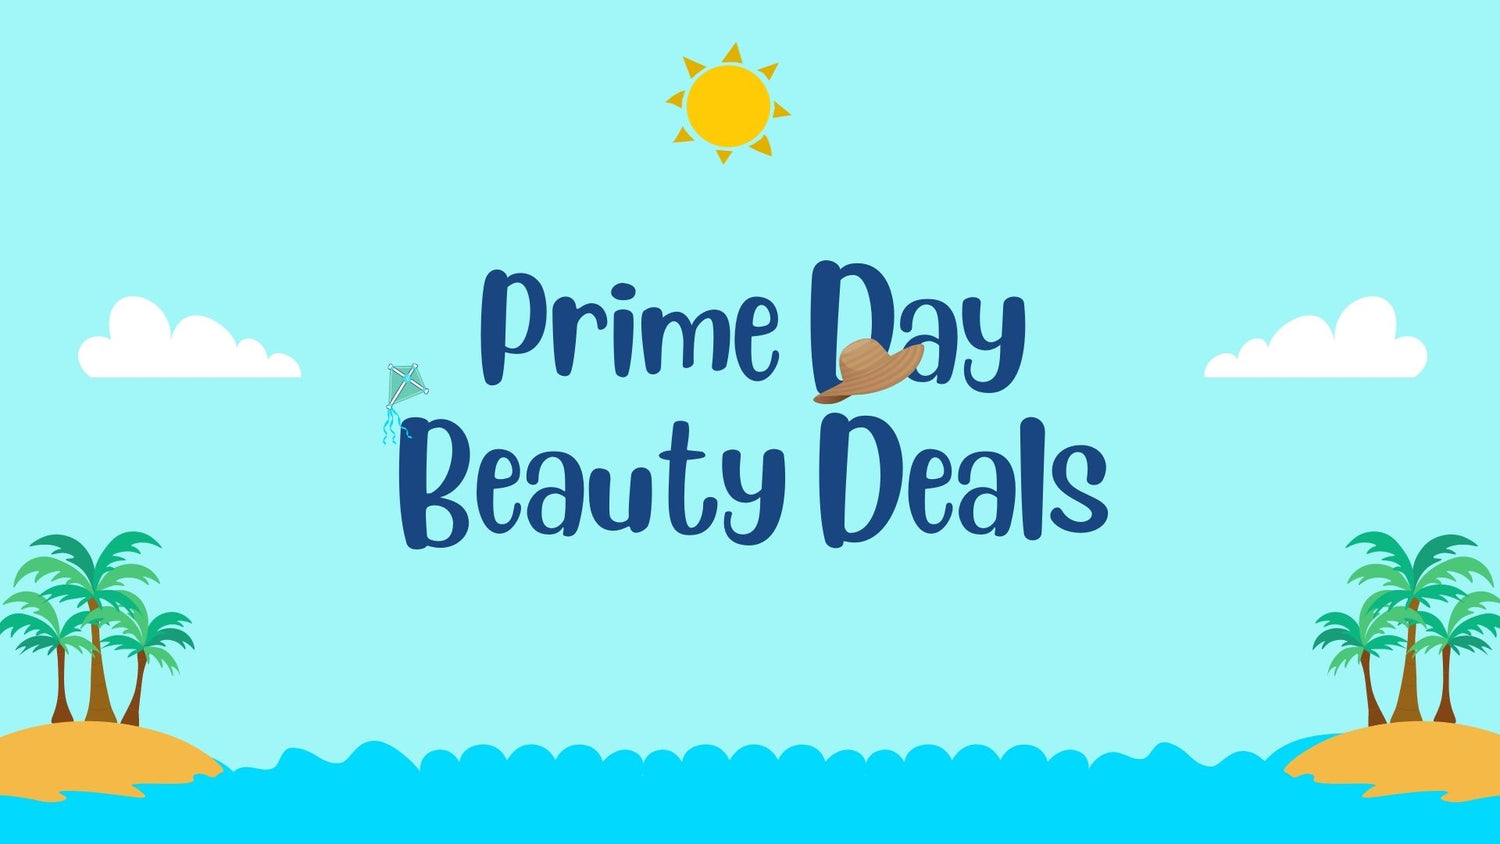 Review, photos, ingredients, trends, skincare, hair care, makeup, amazon prime day sales, hempz, la roche-posay, marc Anthony, bloomeffects, bondi sands, unwrapped life, veil cosmetics, chi, mielle organics